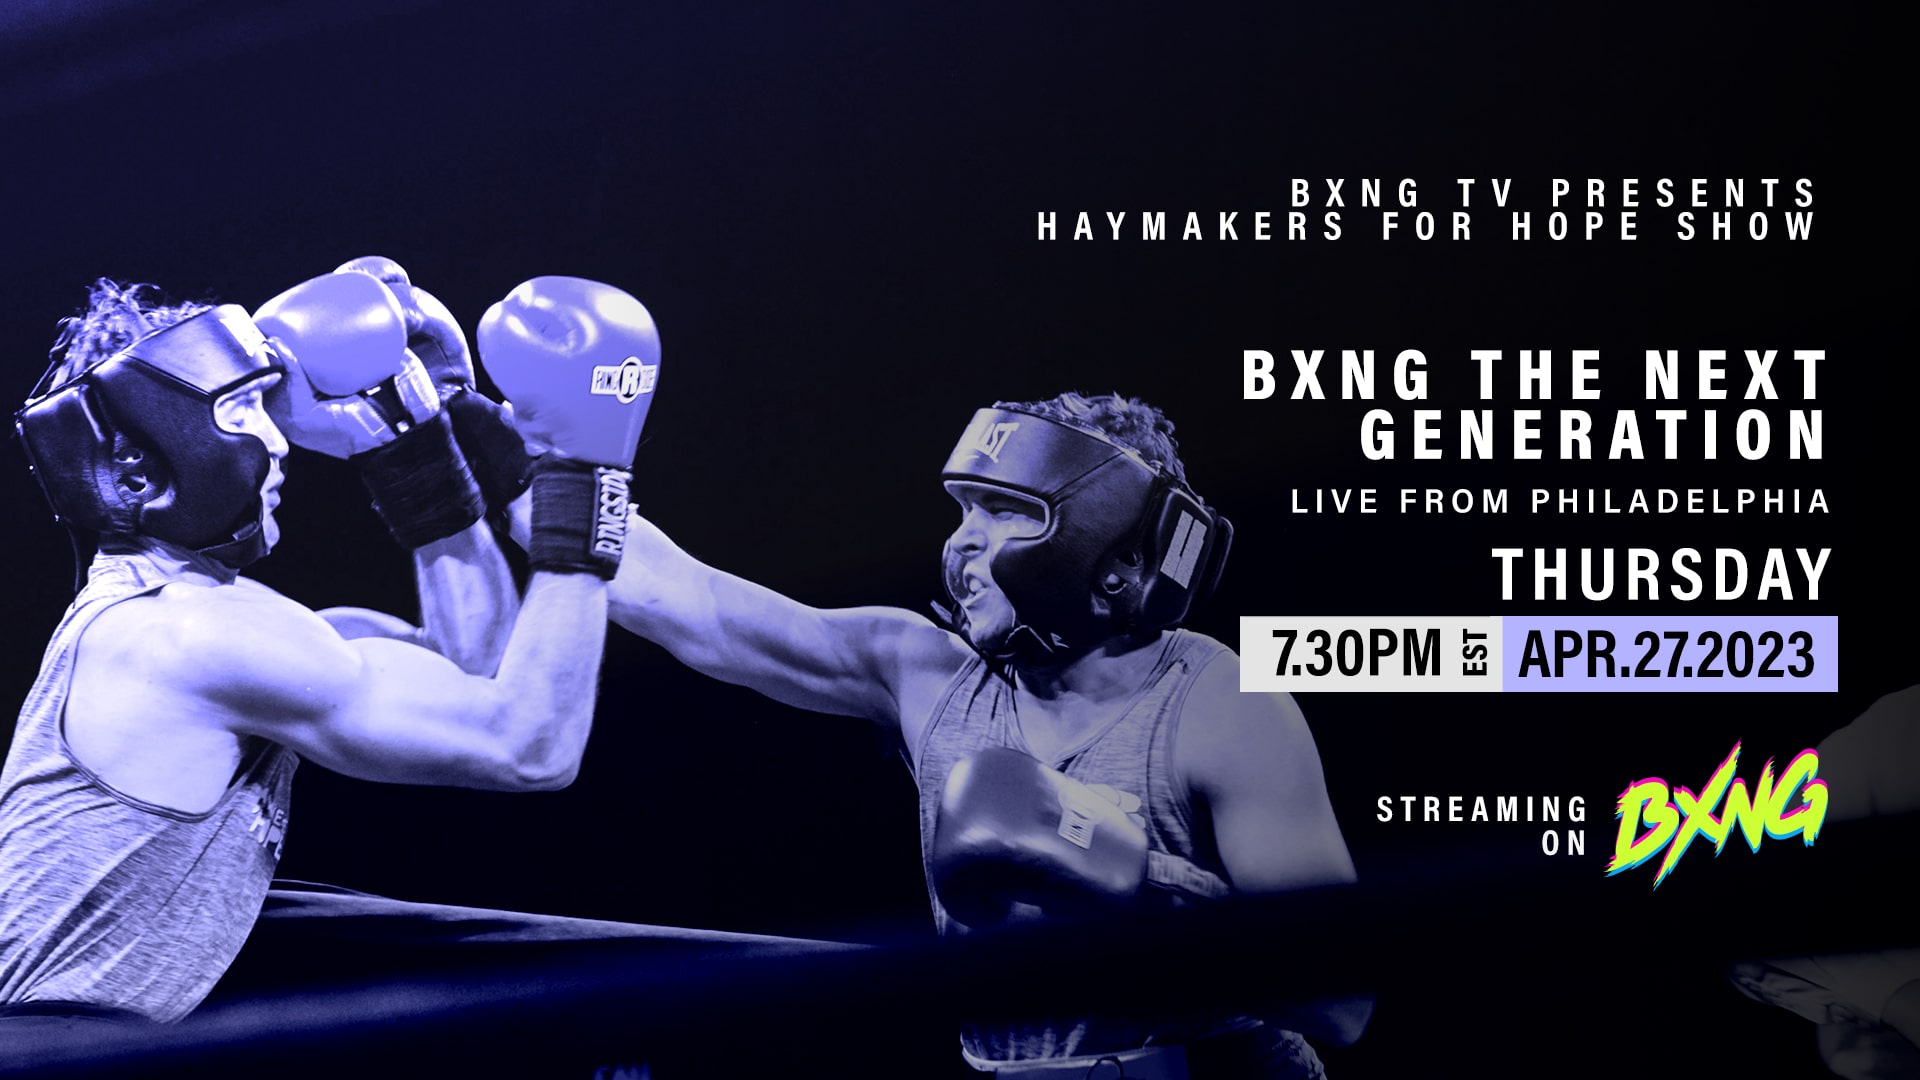 BXNG TV Presents Haymakers for Hope Show Live Stream 04/27/23